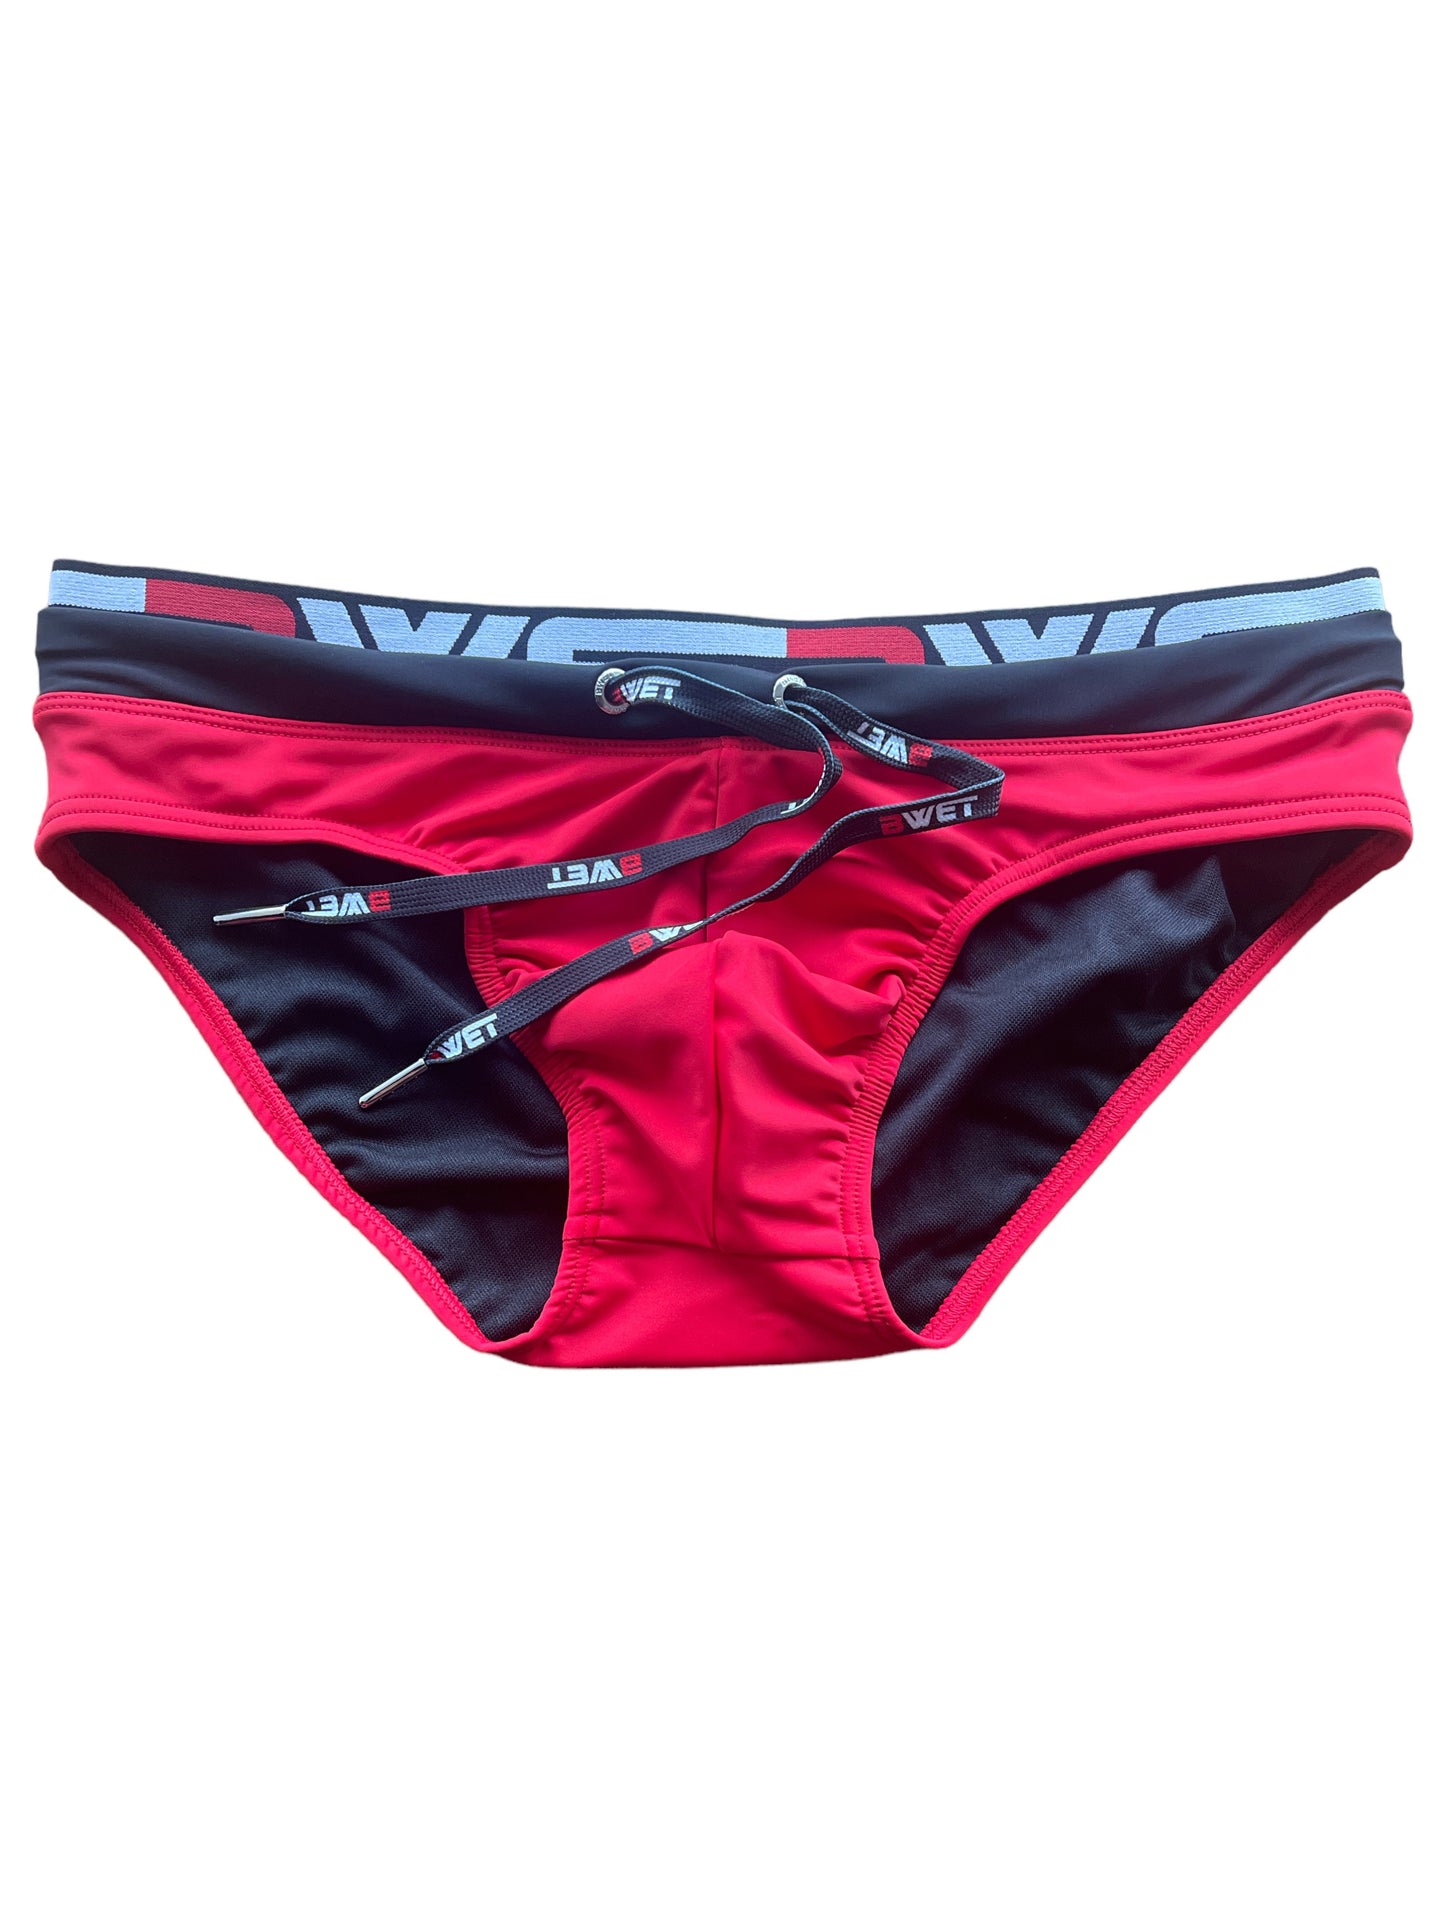 Nemo Beach Swimming Briefs - Double Waistband for Bold Style and Comfort